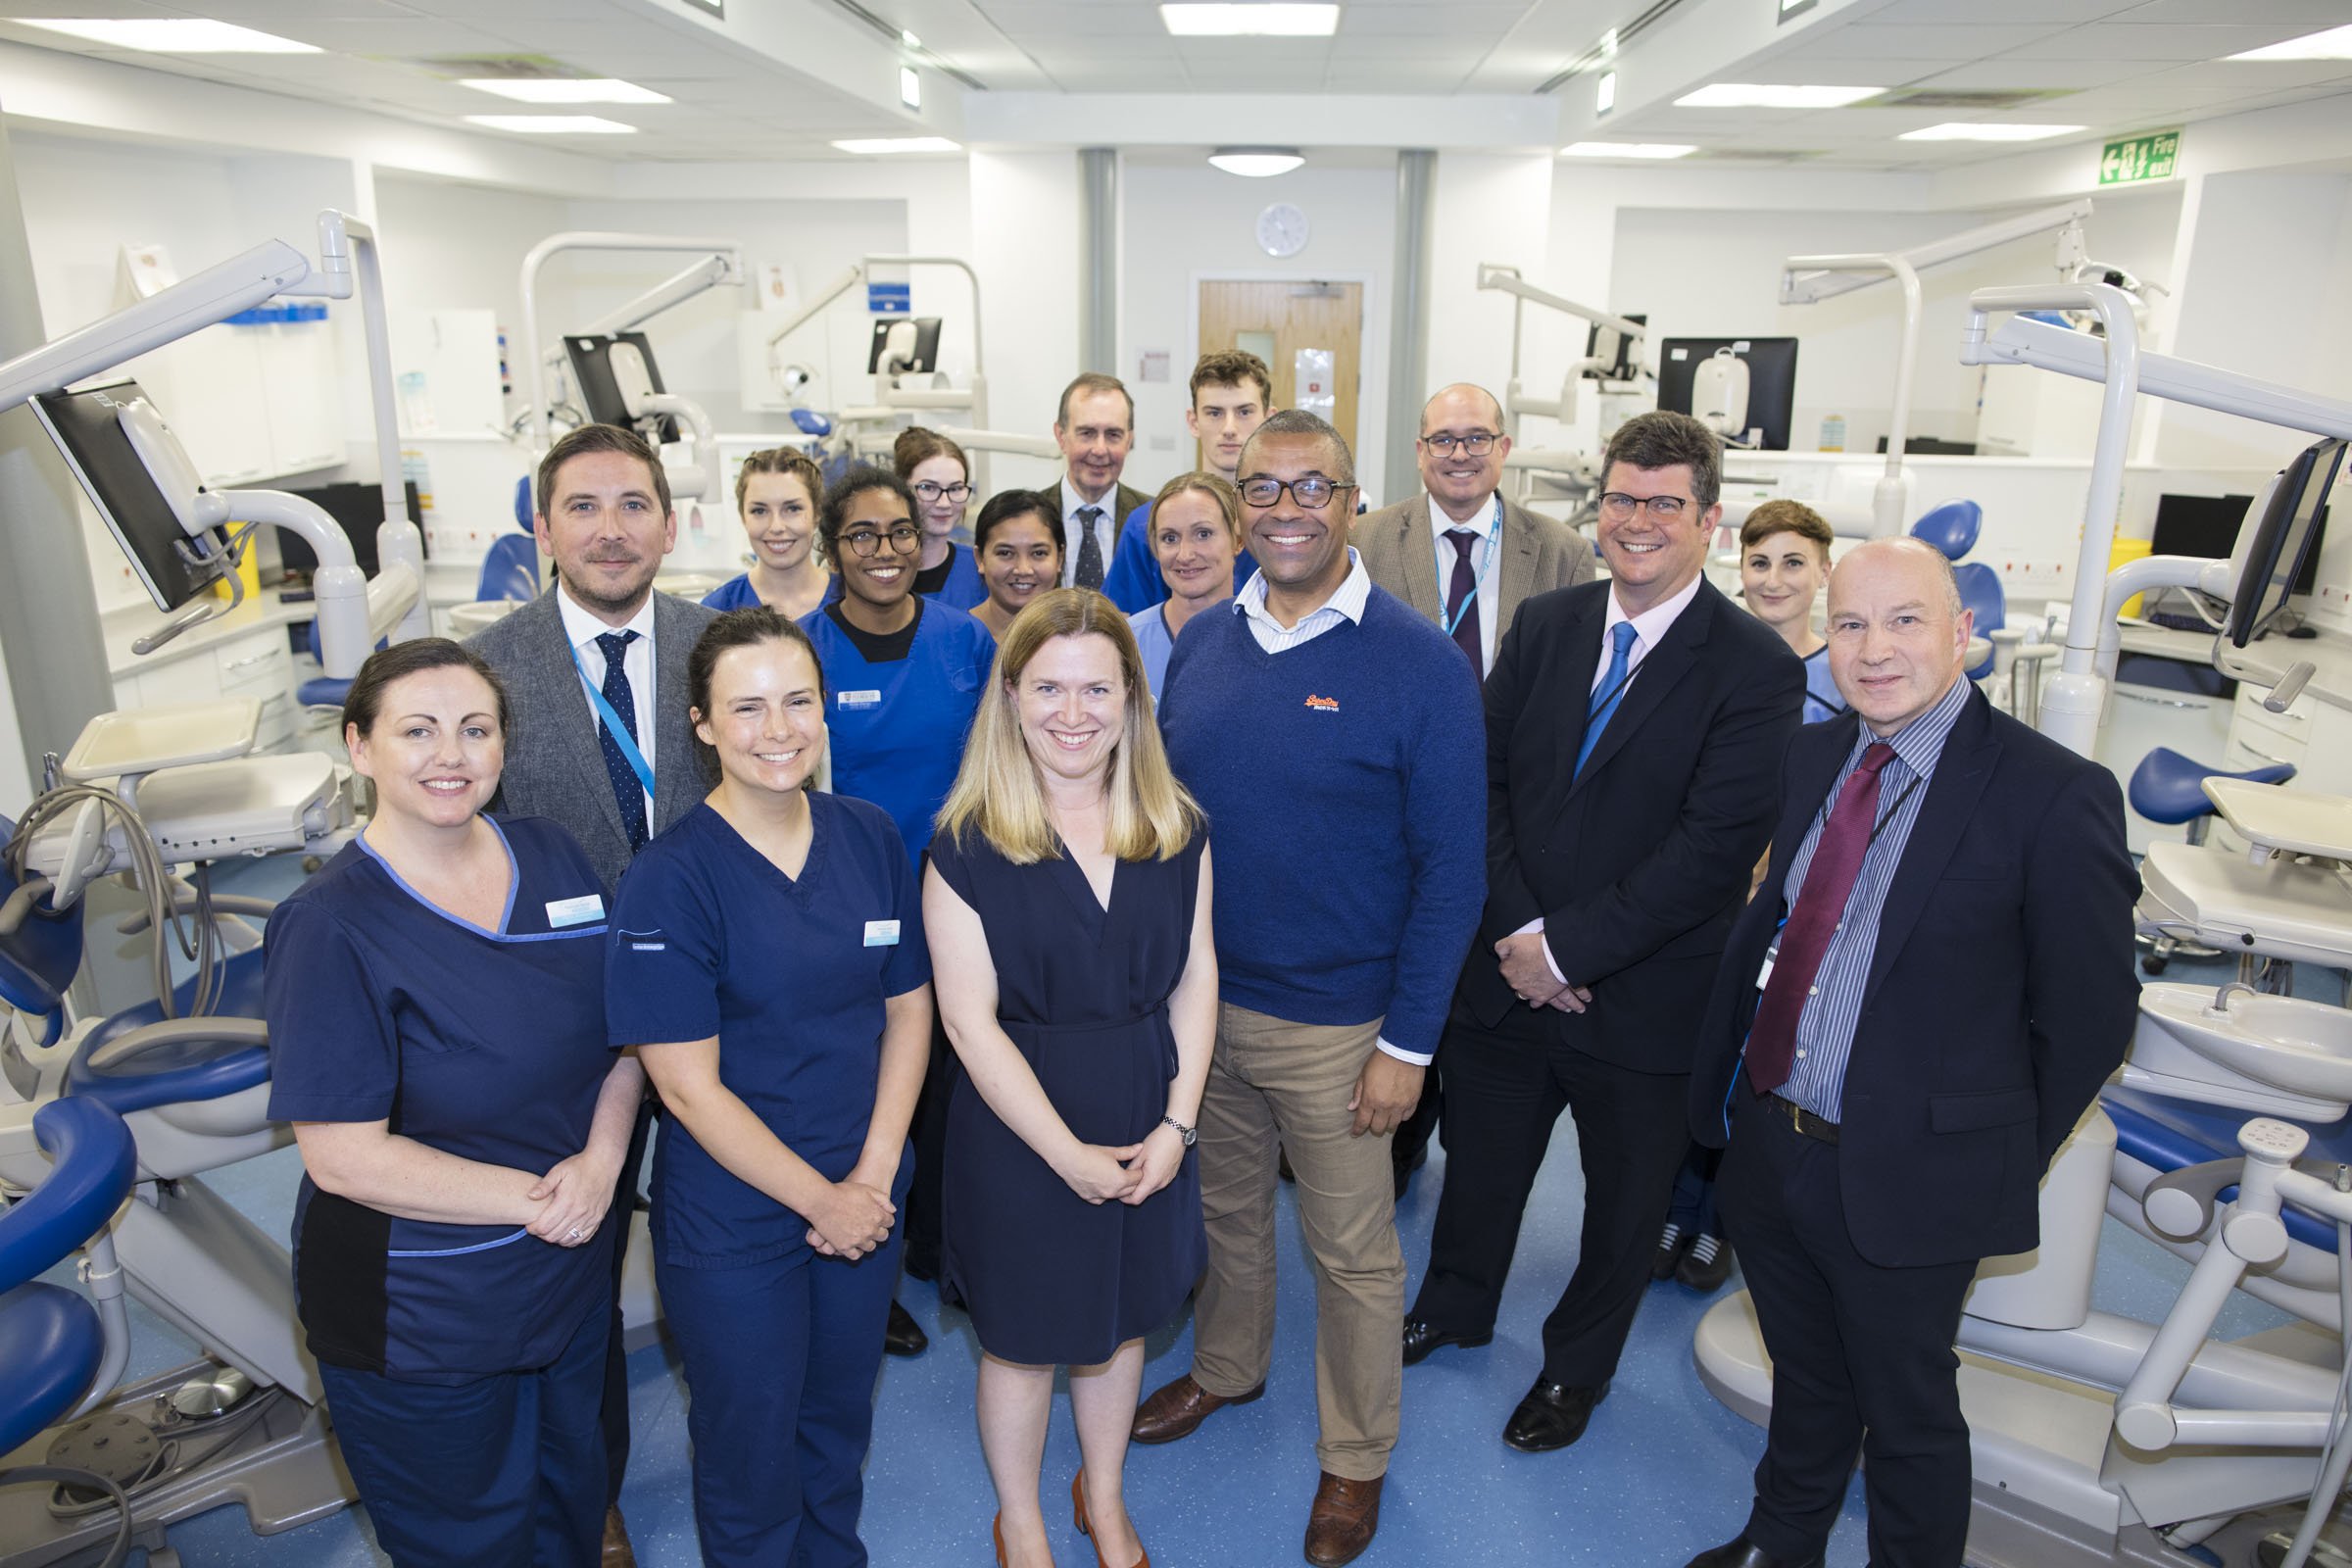 Government Minister visits Plymouth to see pioneering community dentistry facility